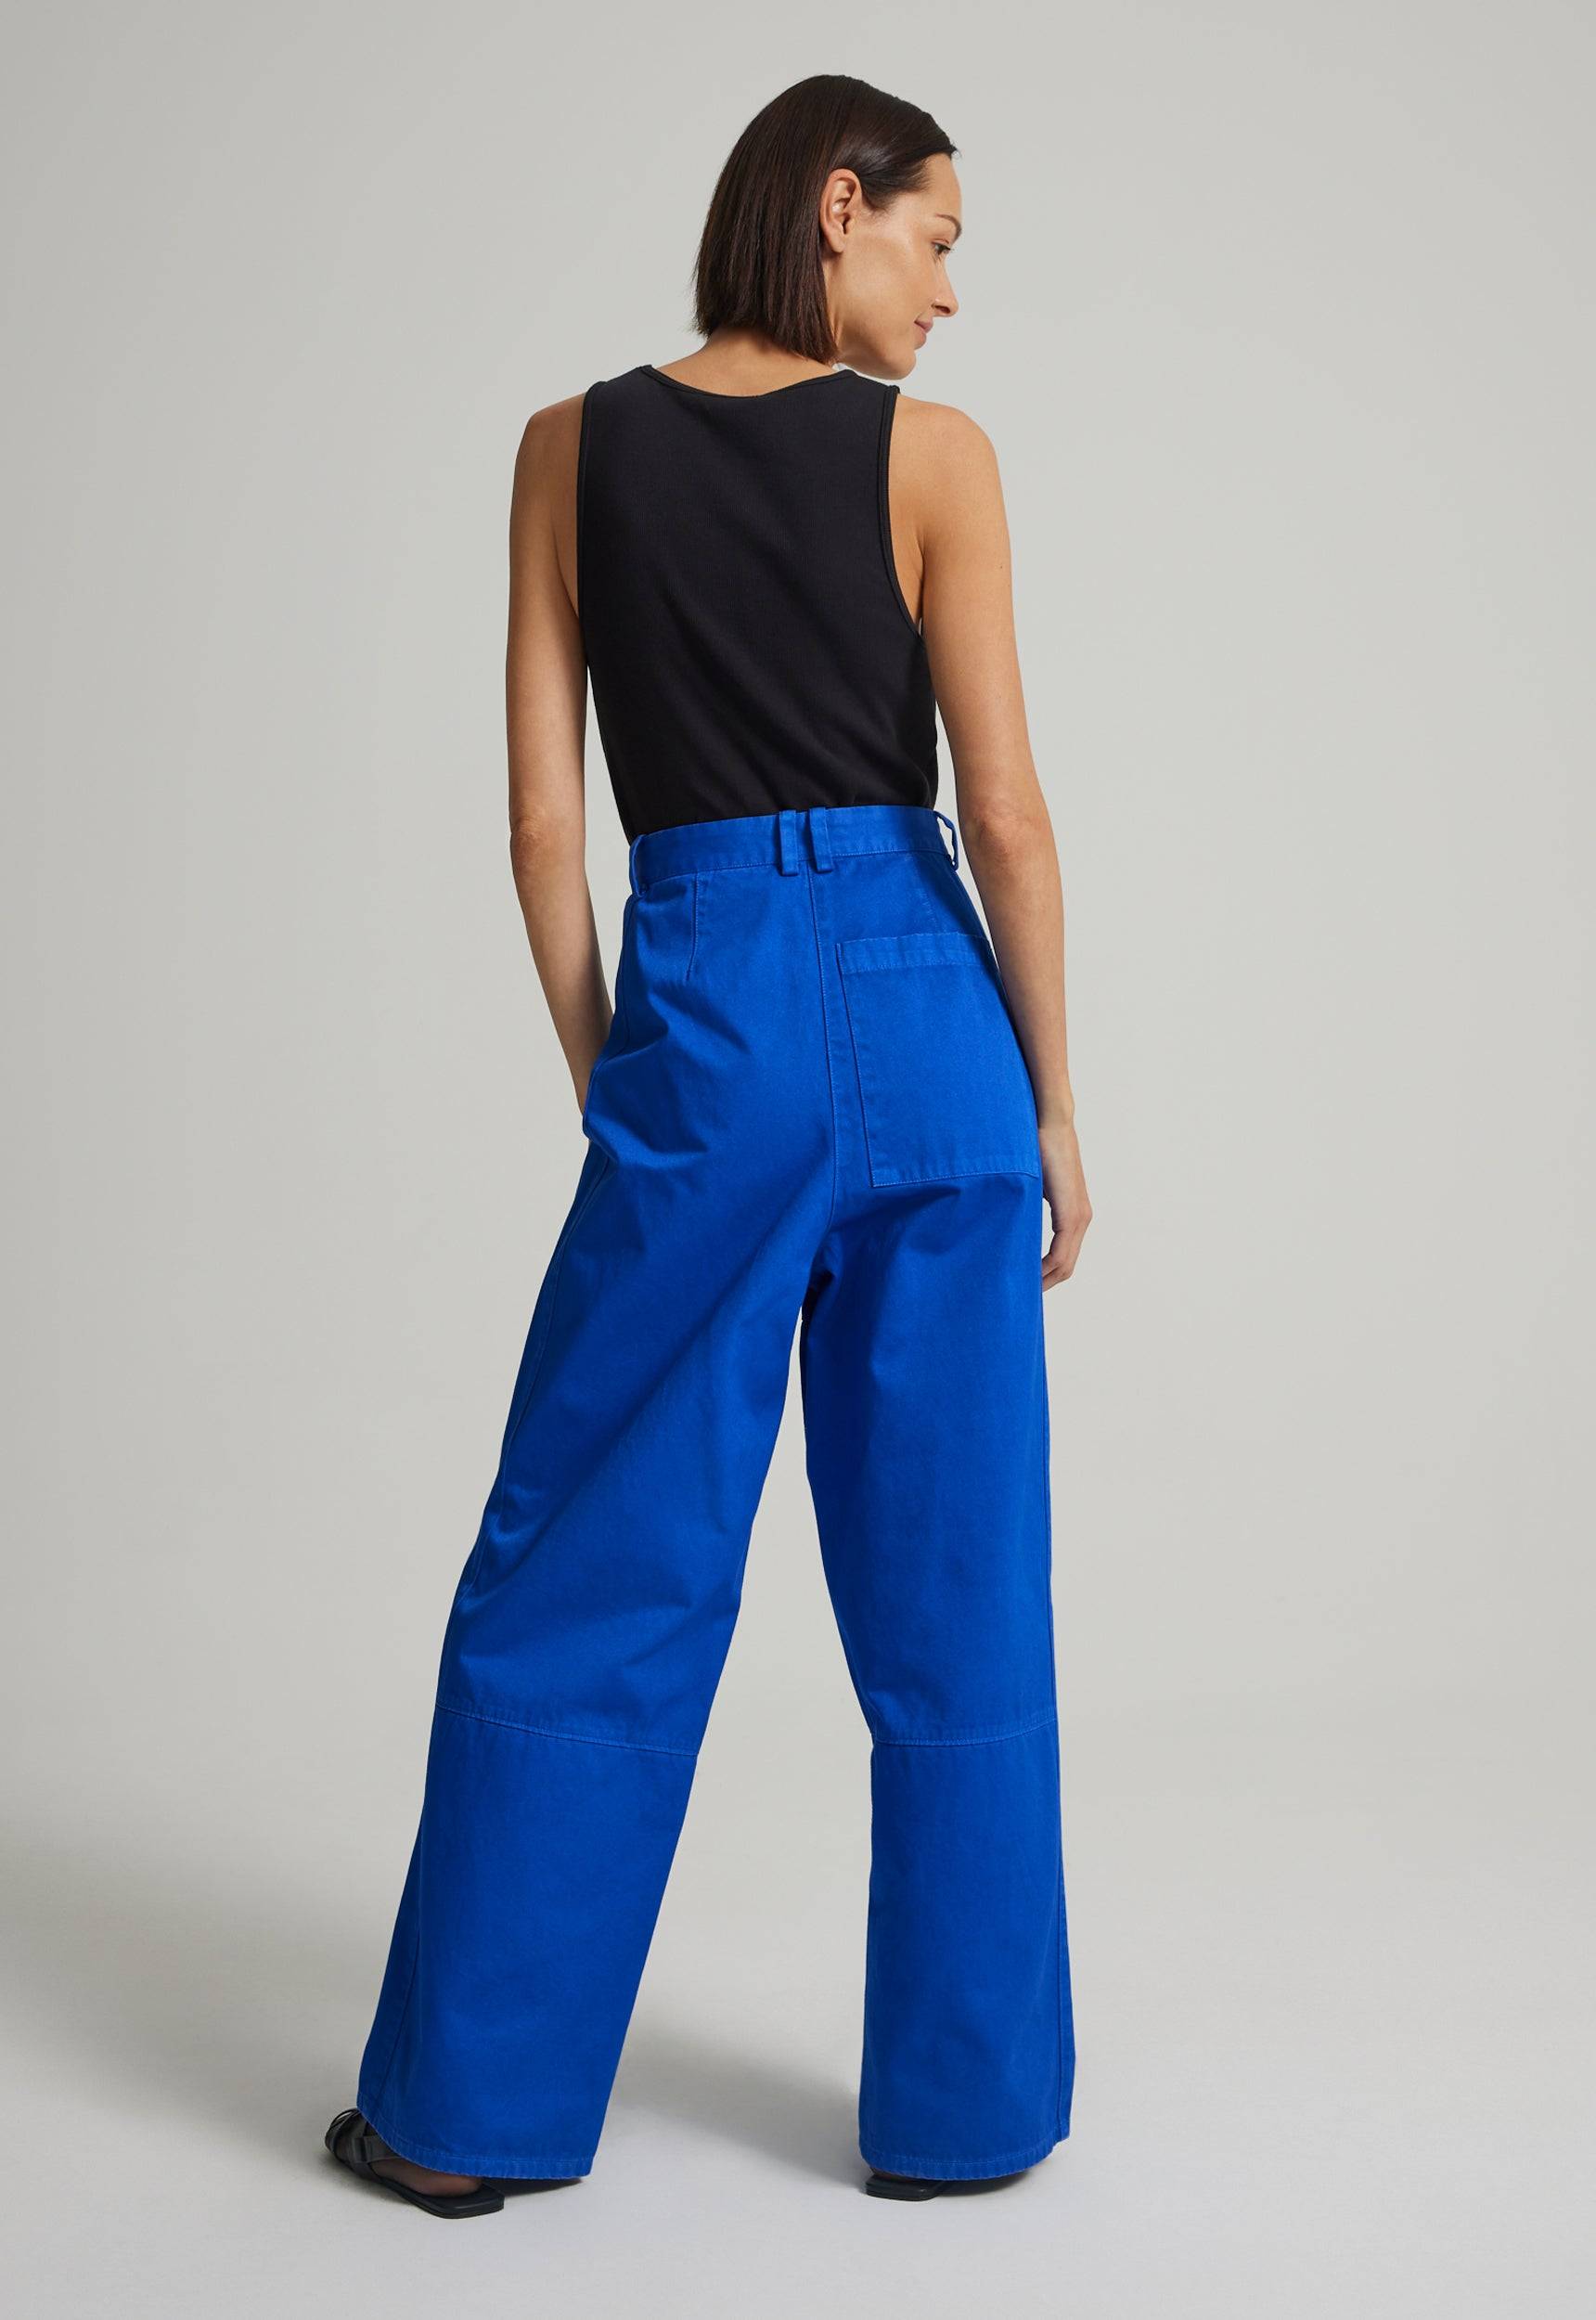 Jac+Jack WORKS COTTON TWILL PANT in Aerial Blue